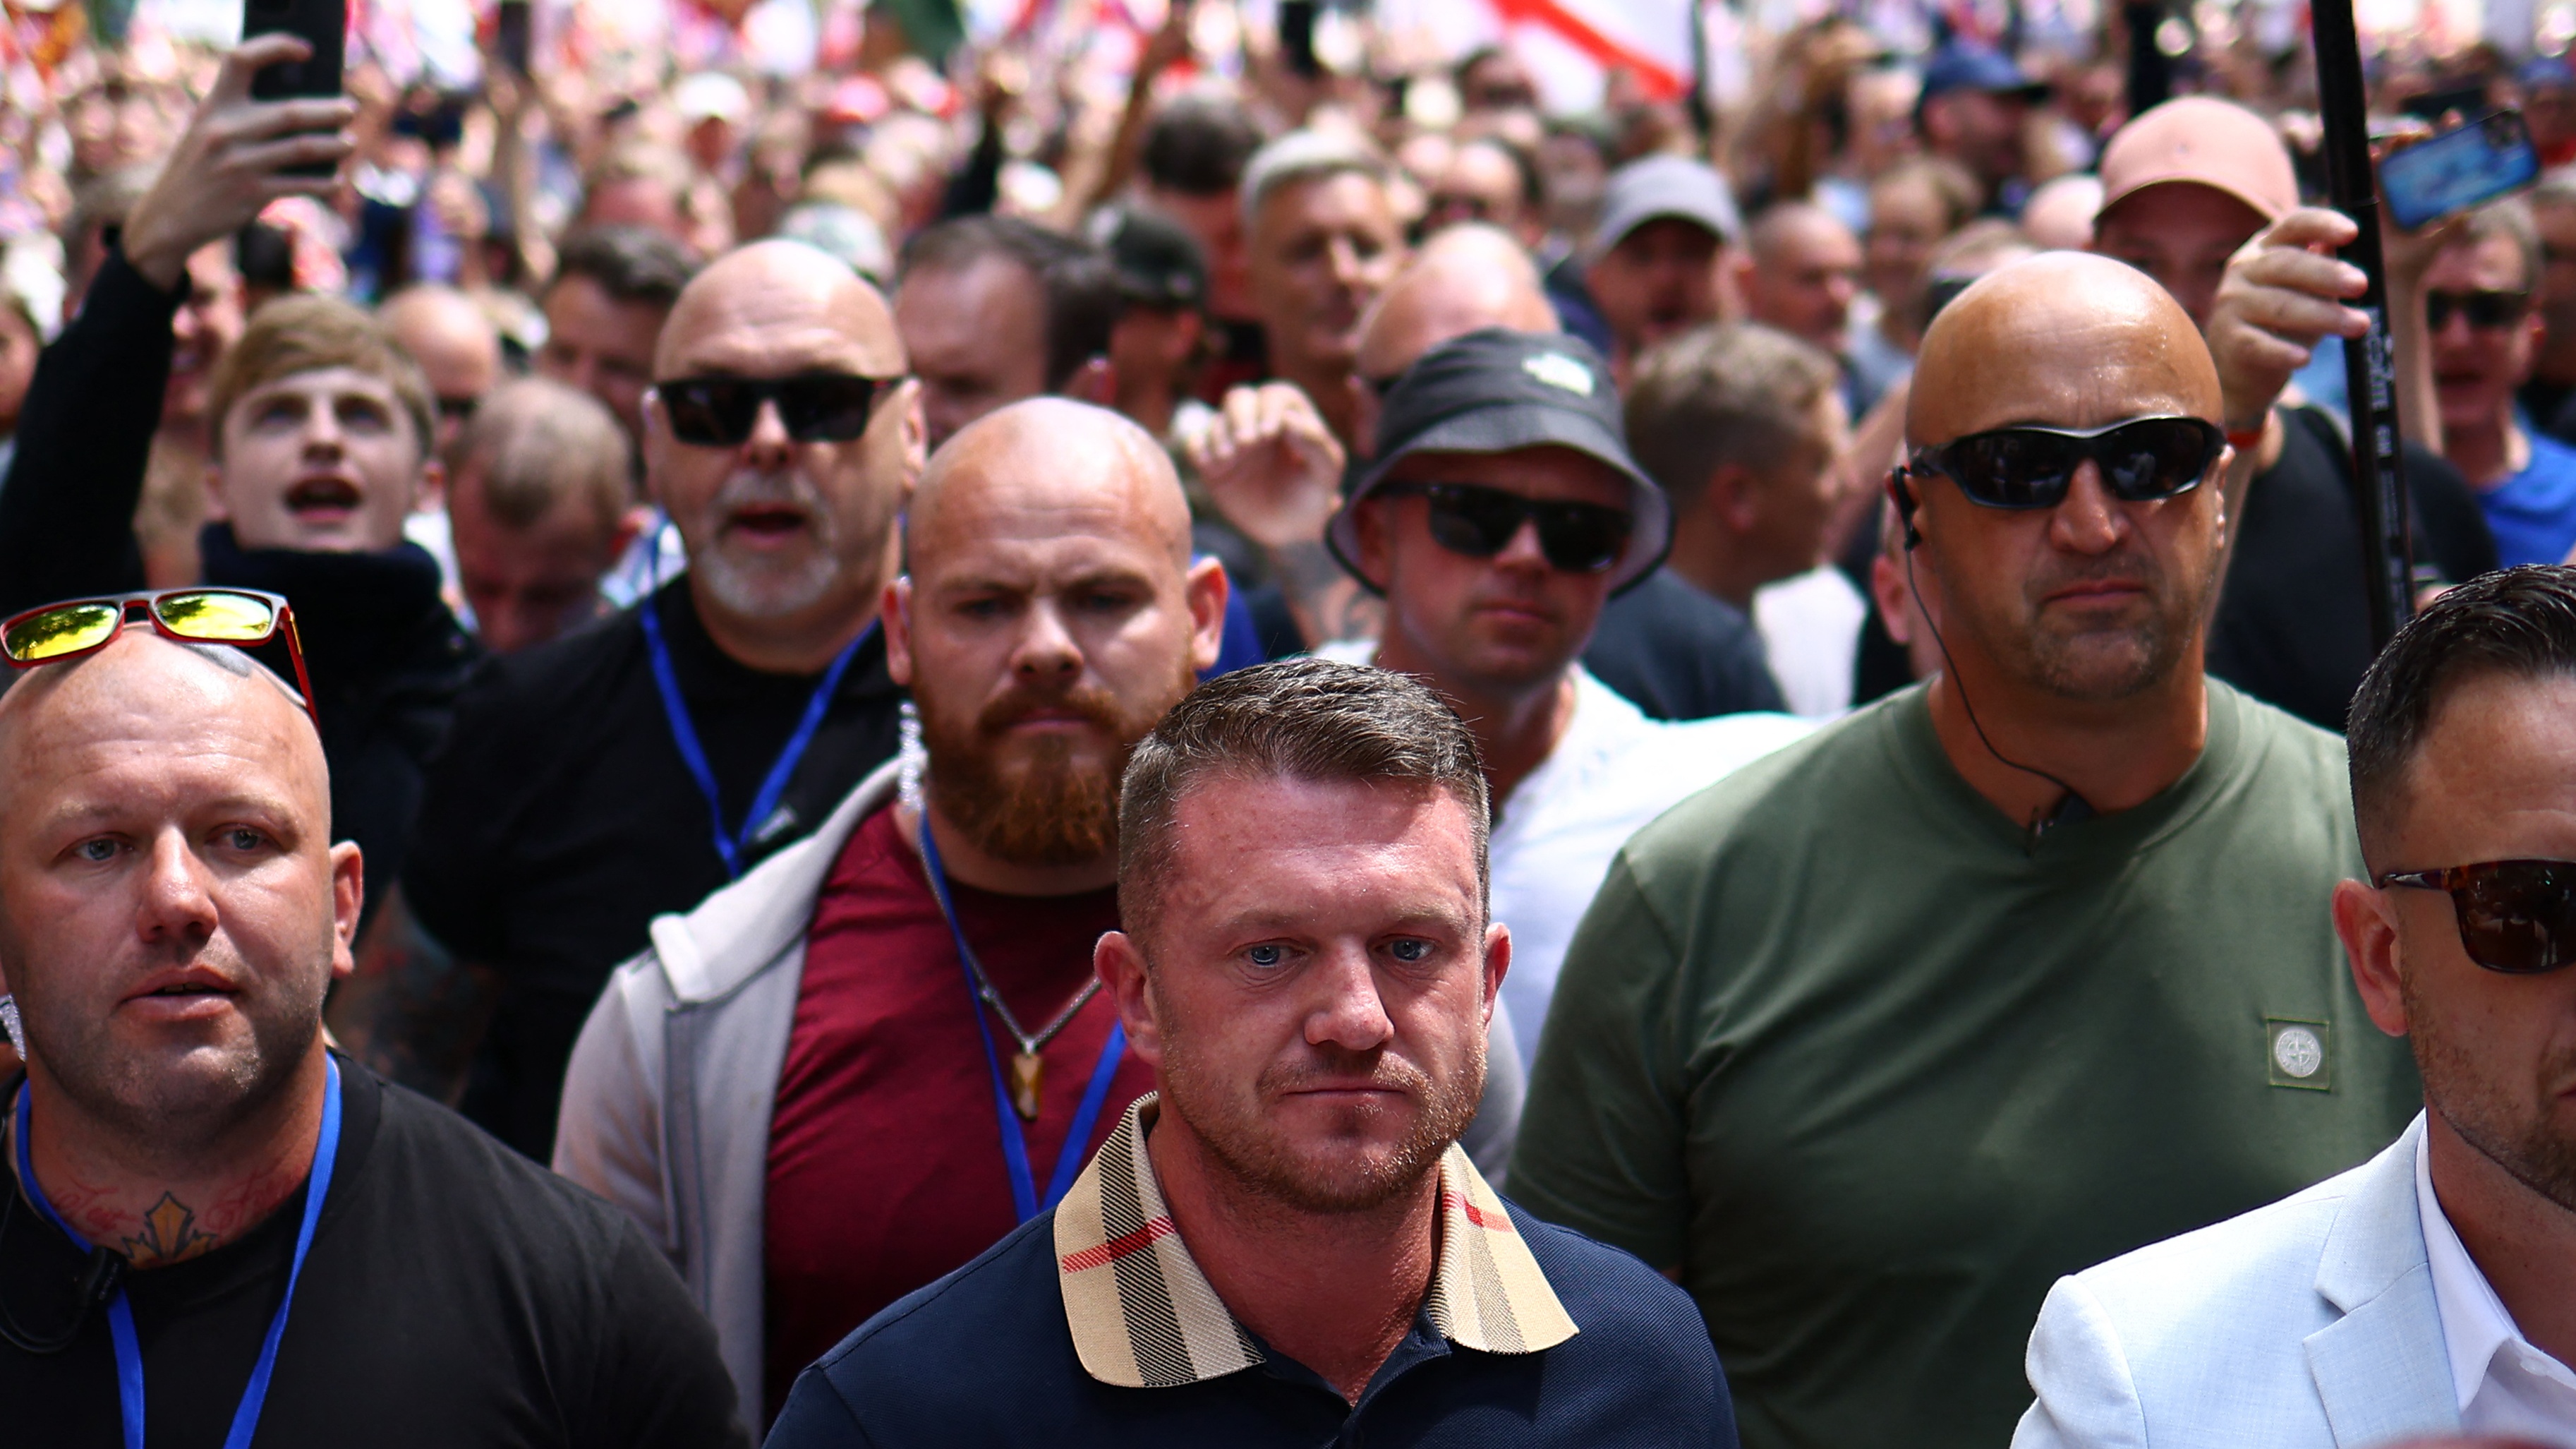  Does the EDL still exist? 